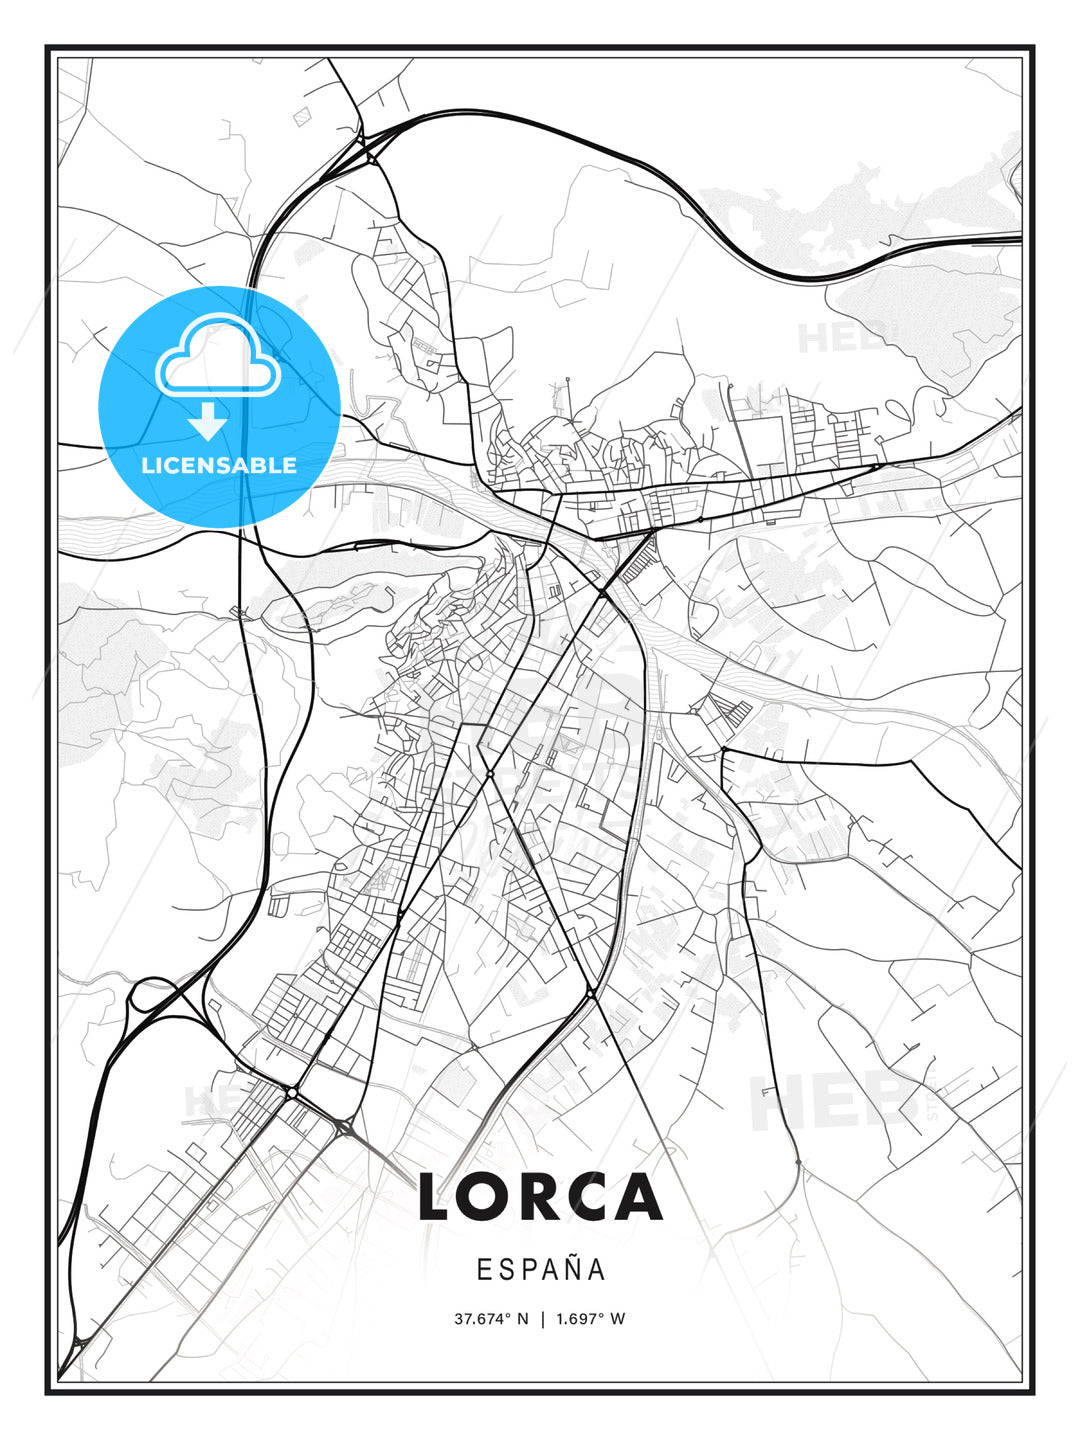 Lorca, Spain, Modern Print Template in Various Formats - HEBSTREITS Sketches